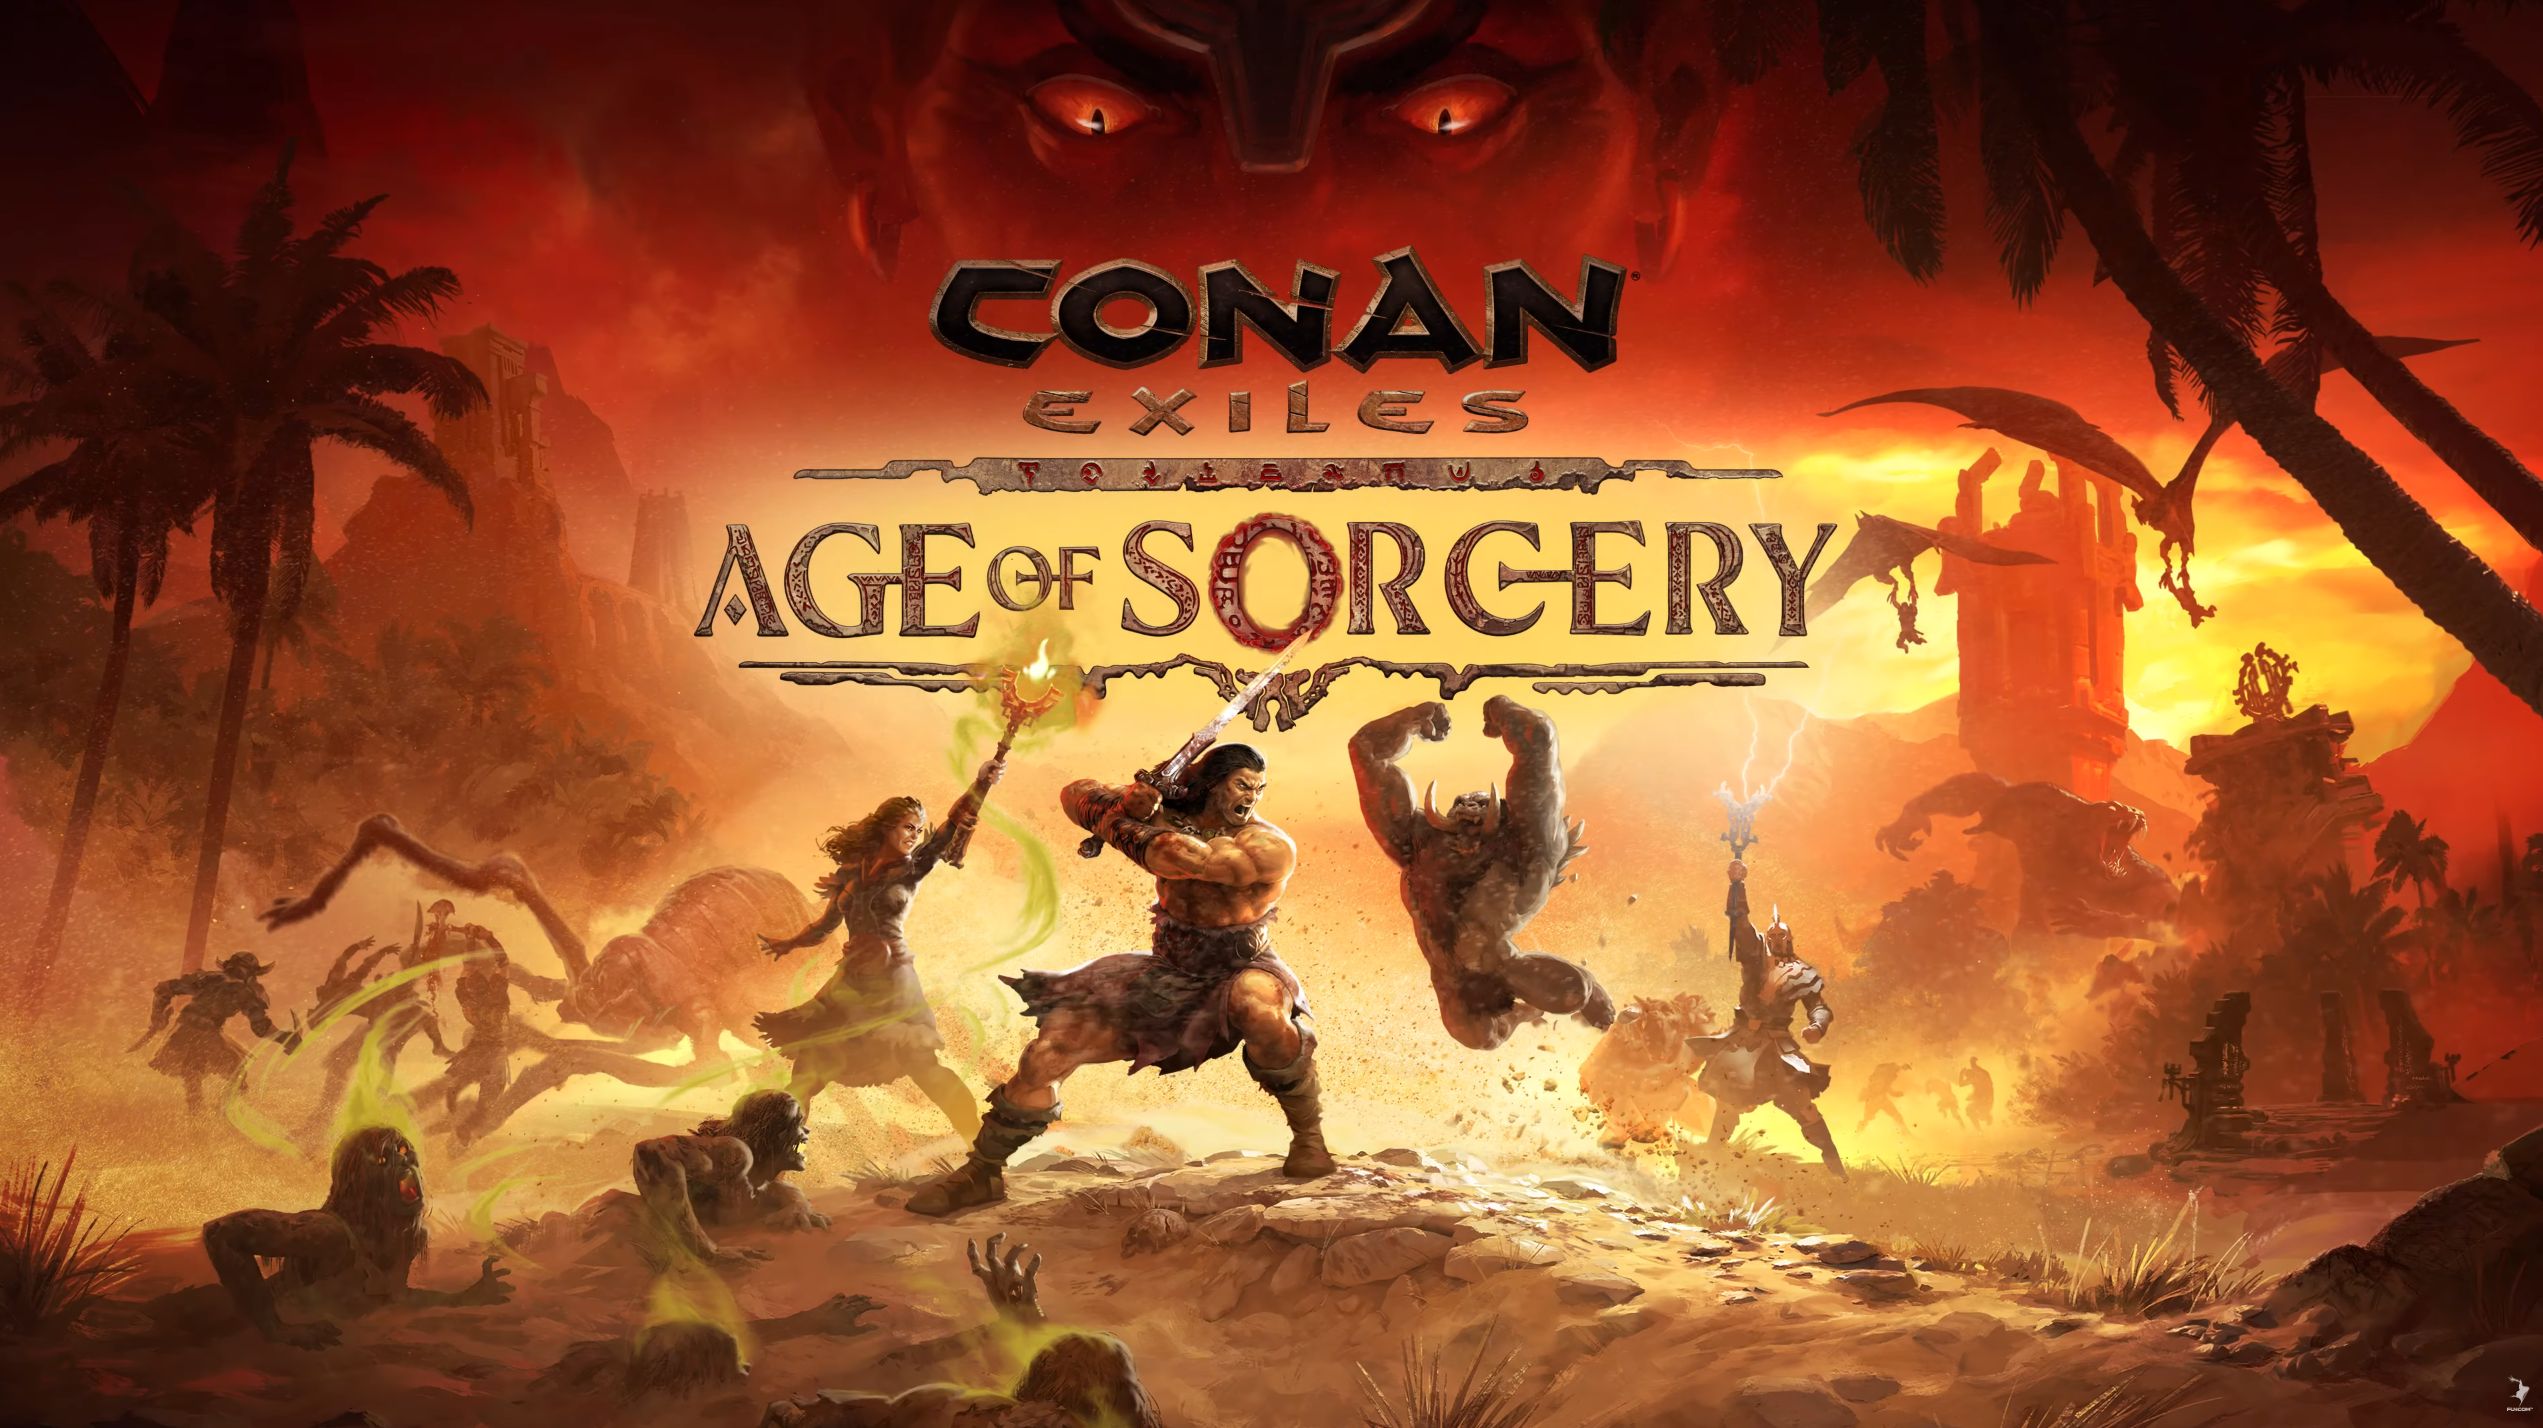 Conan Exiles: It's going to be bloody!  Launch trailer for Age of Sorcery